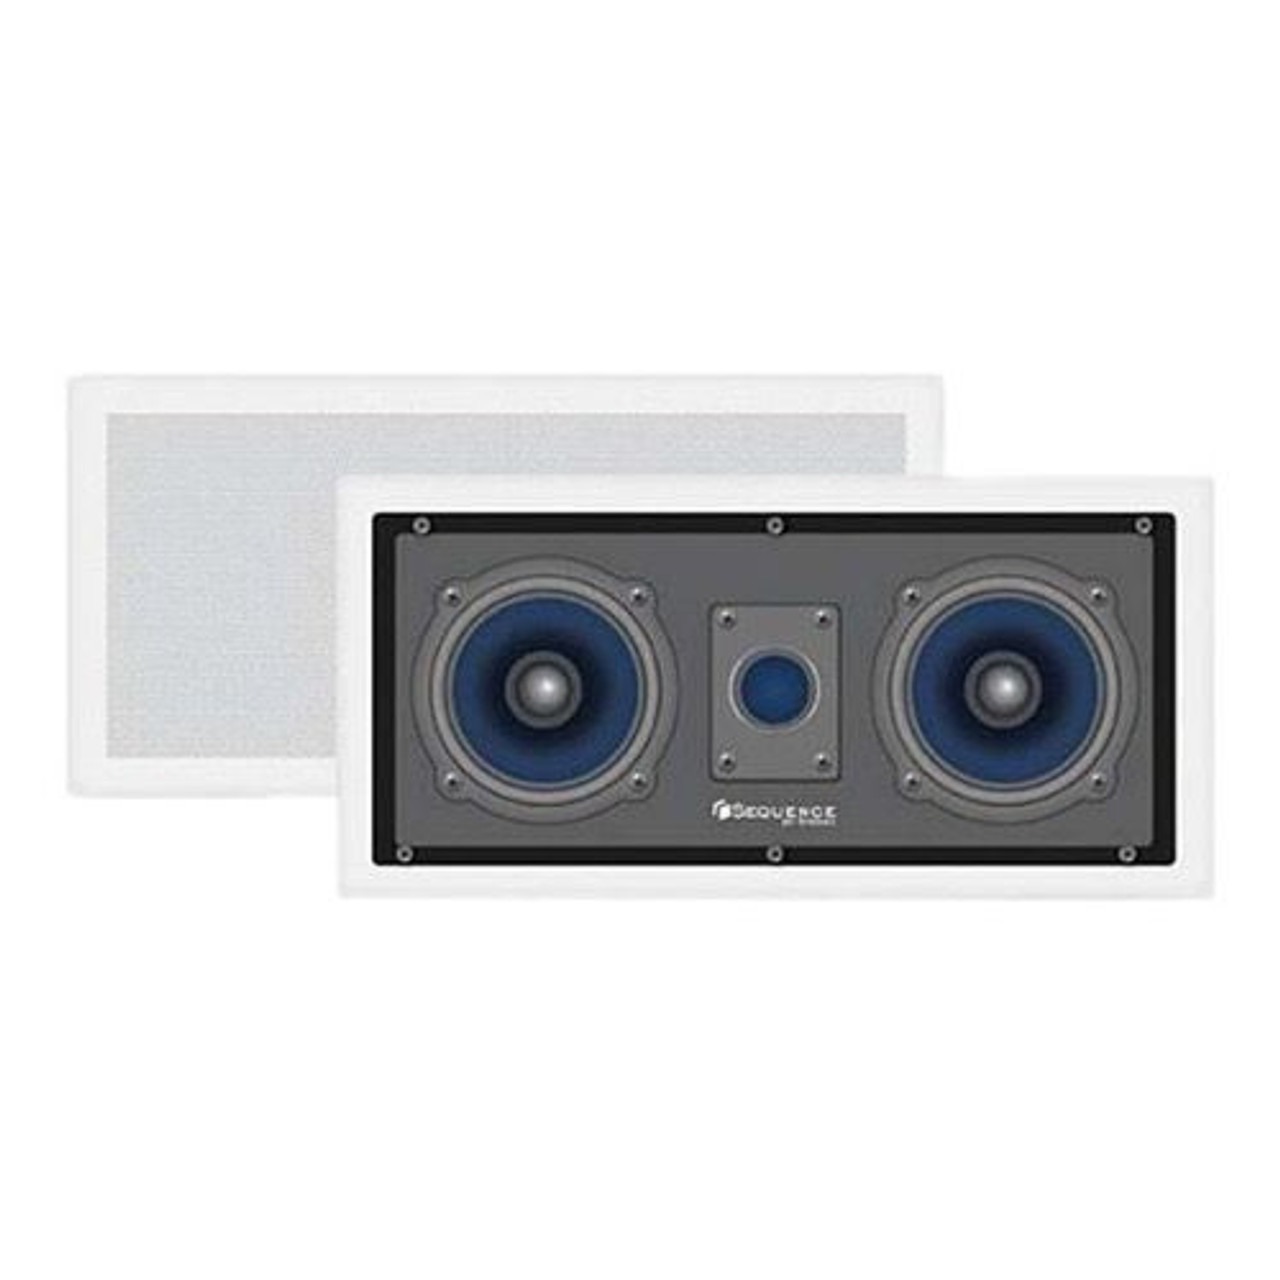 Sequence 730-205 Premier Series Dual 5 1/4" Home Theater Two Way Left / Center / Right in Wall Speaker with Dome Tweeter by Steren